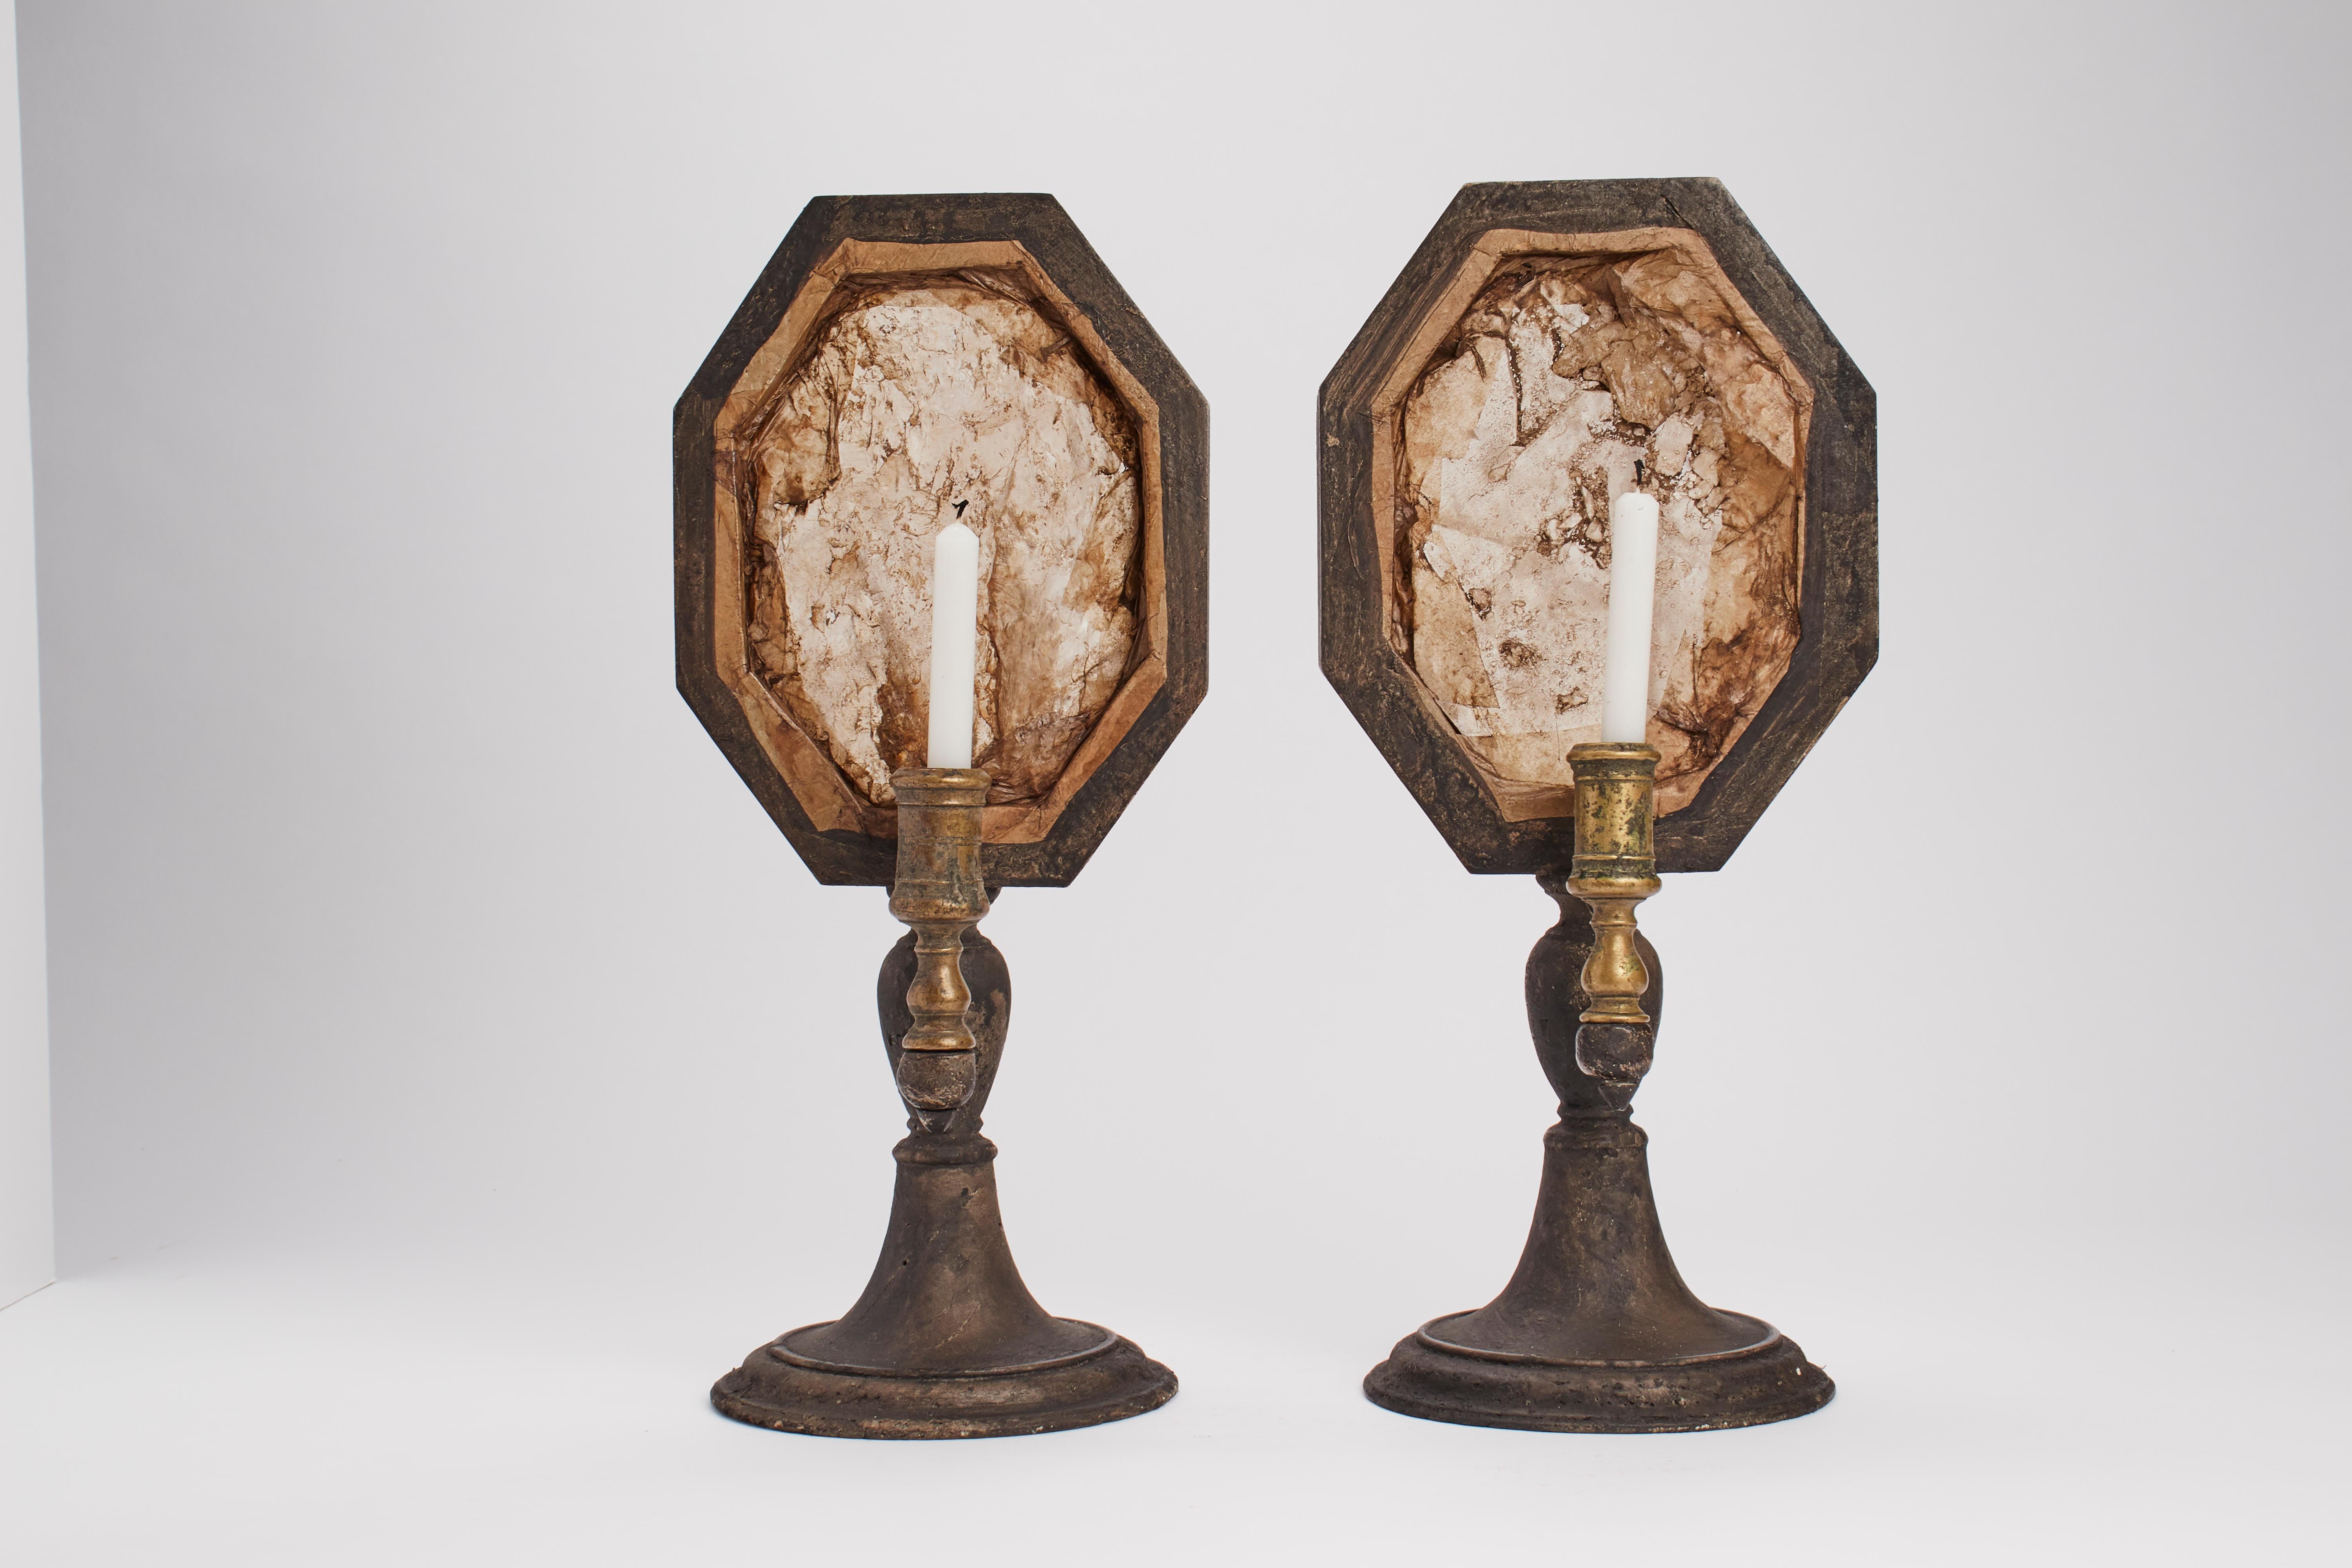 A Wunderkammer naturalia pair of rock crystals specimens octagonal shape with black wooden frames, mounted over black wooden bases, with candle holders, Italy, 1880 ca.